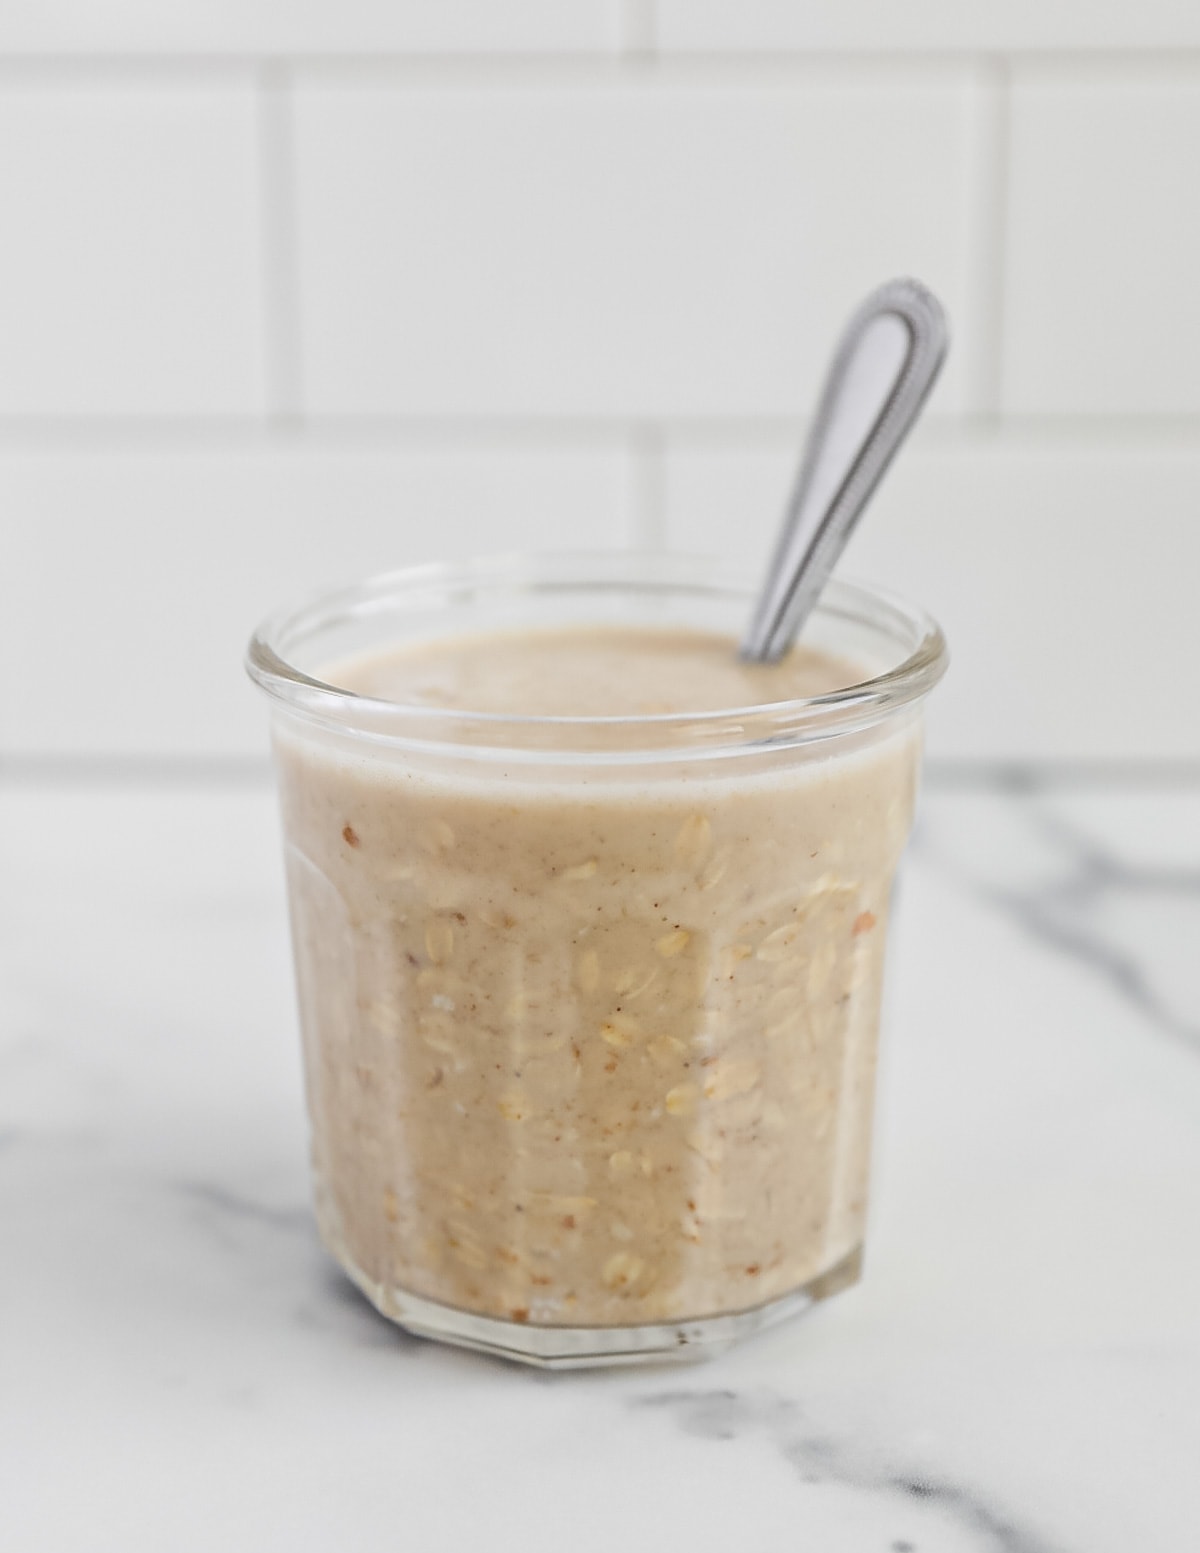 A clear glass jar filled with oats and oat milk with a spoon in it